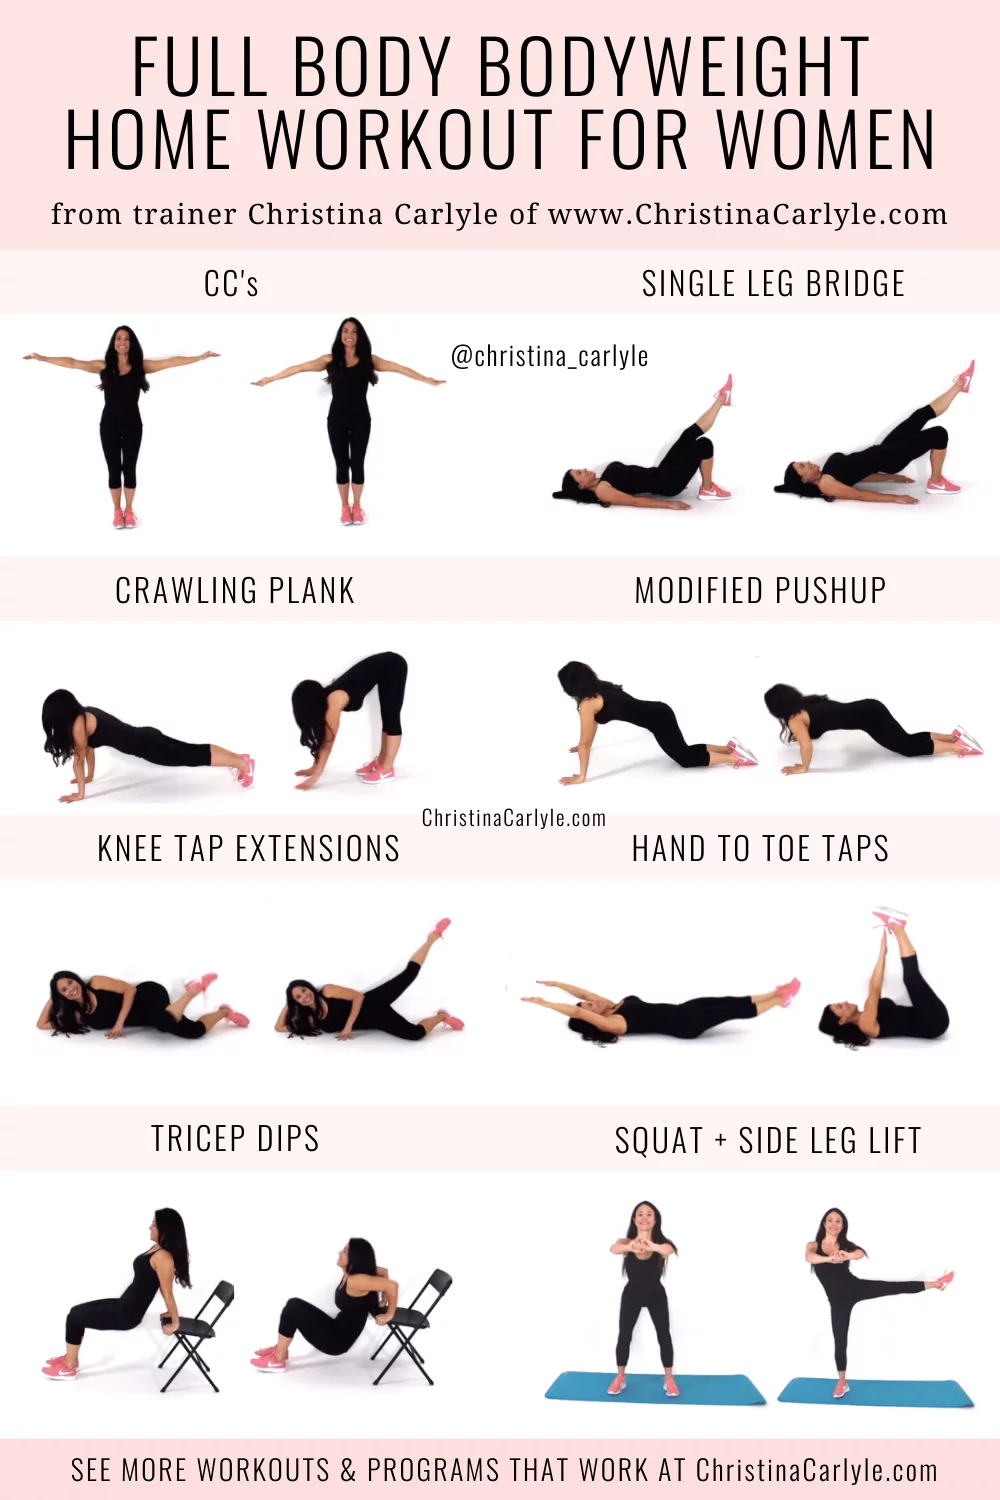 Free Weight Exercises for Your Entire Body